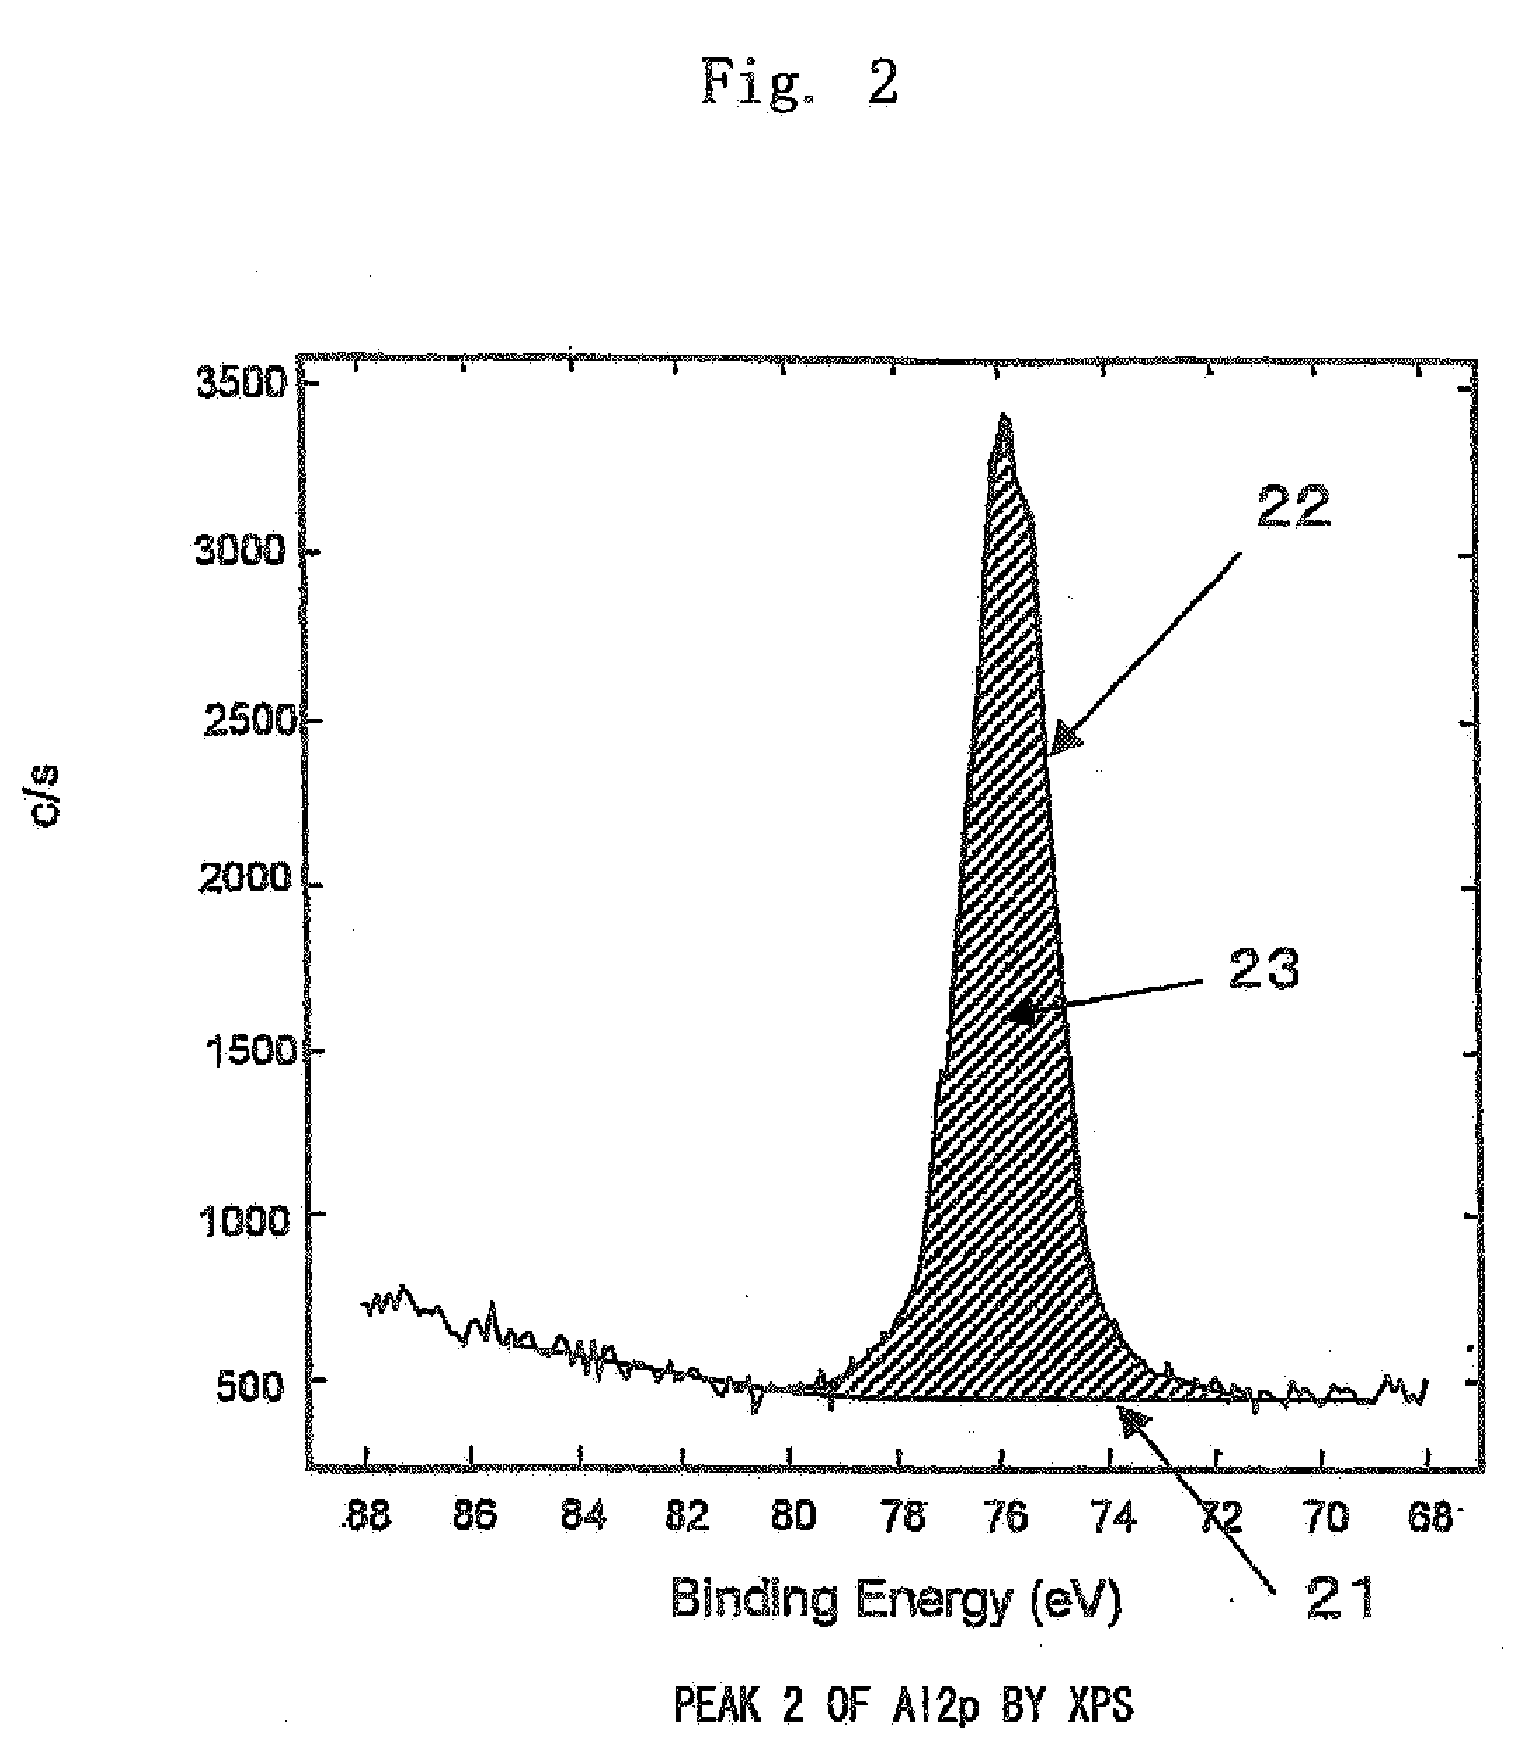 Surface-Treated Metal Materials, Method of Treating the Surfaces Thereof, Resin-Coated Metal Materials, Cans and Can Lids